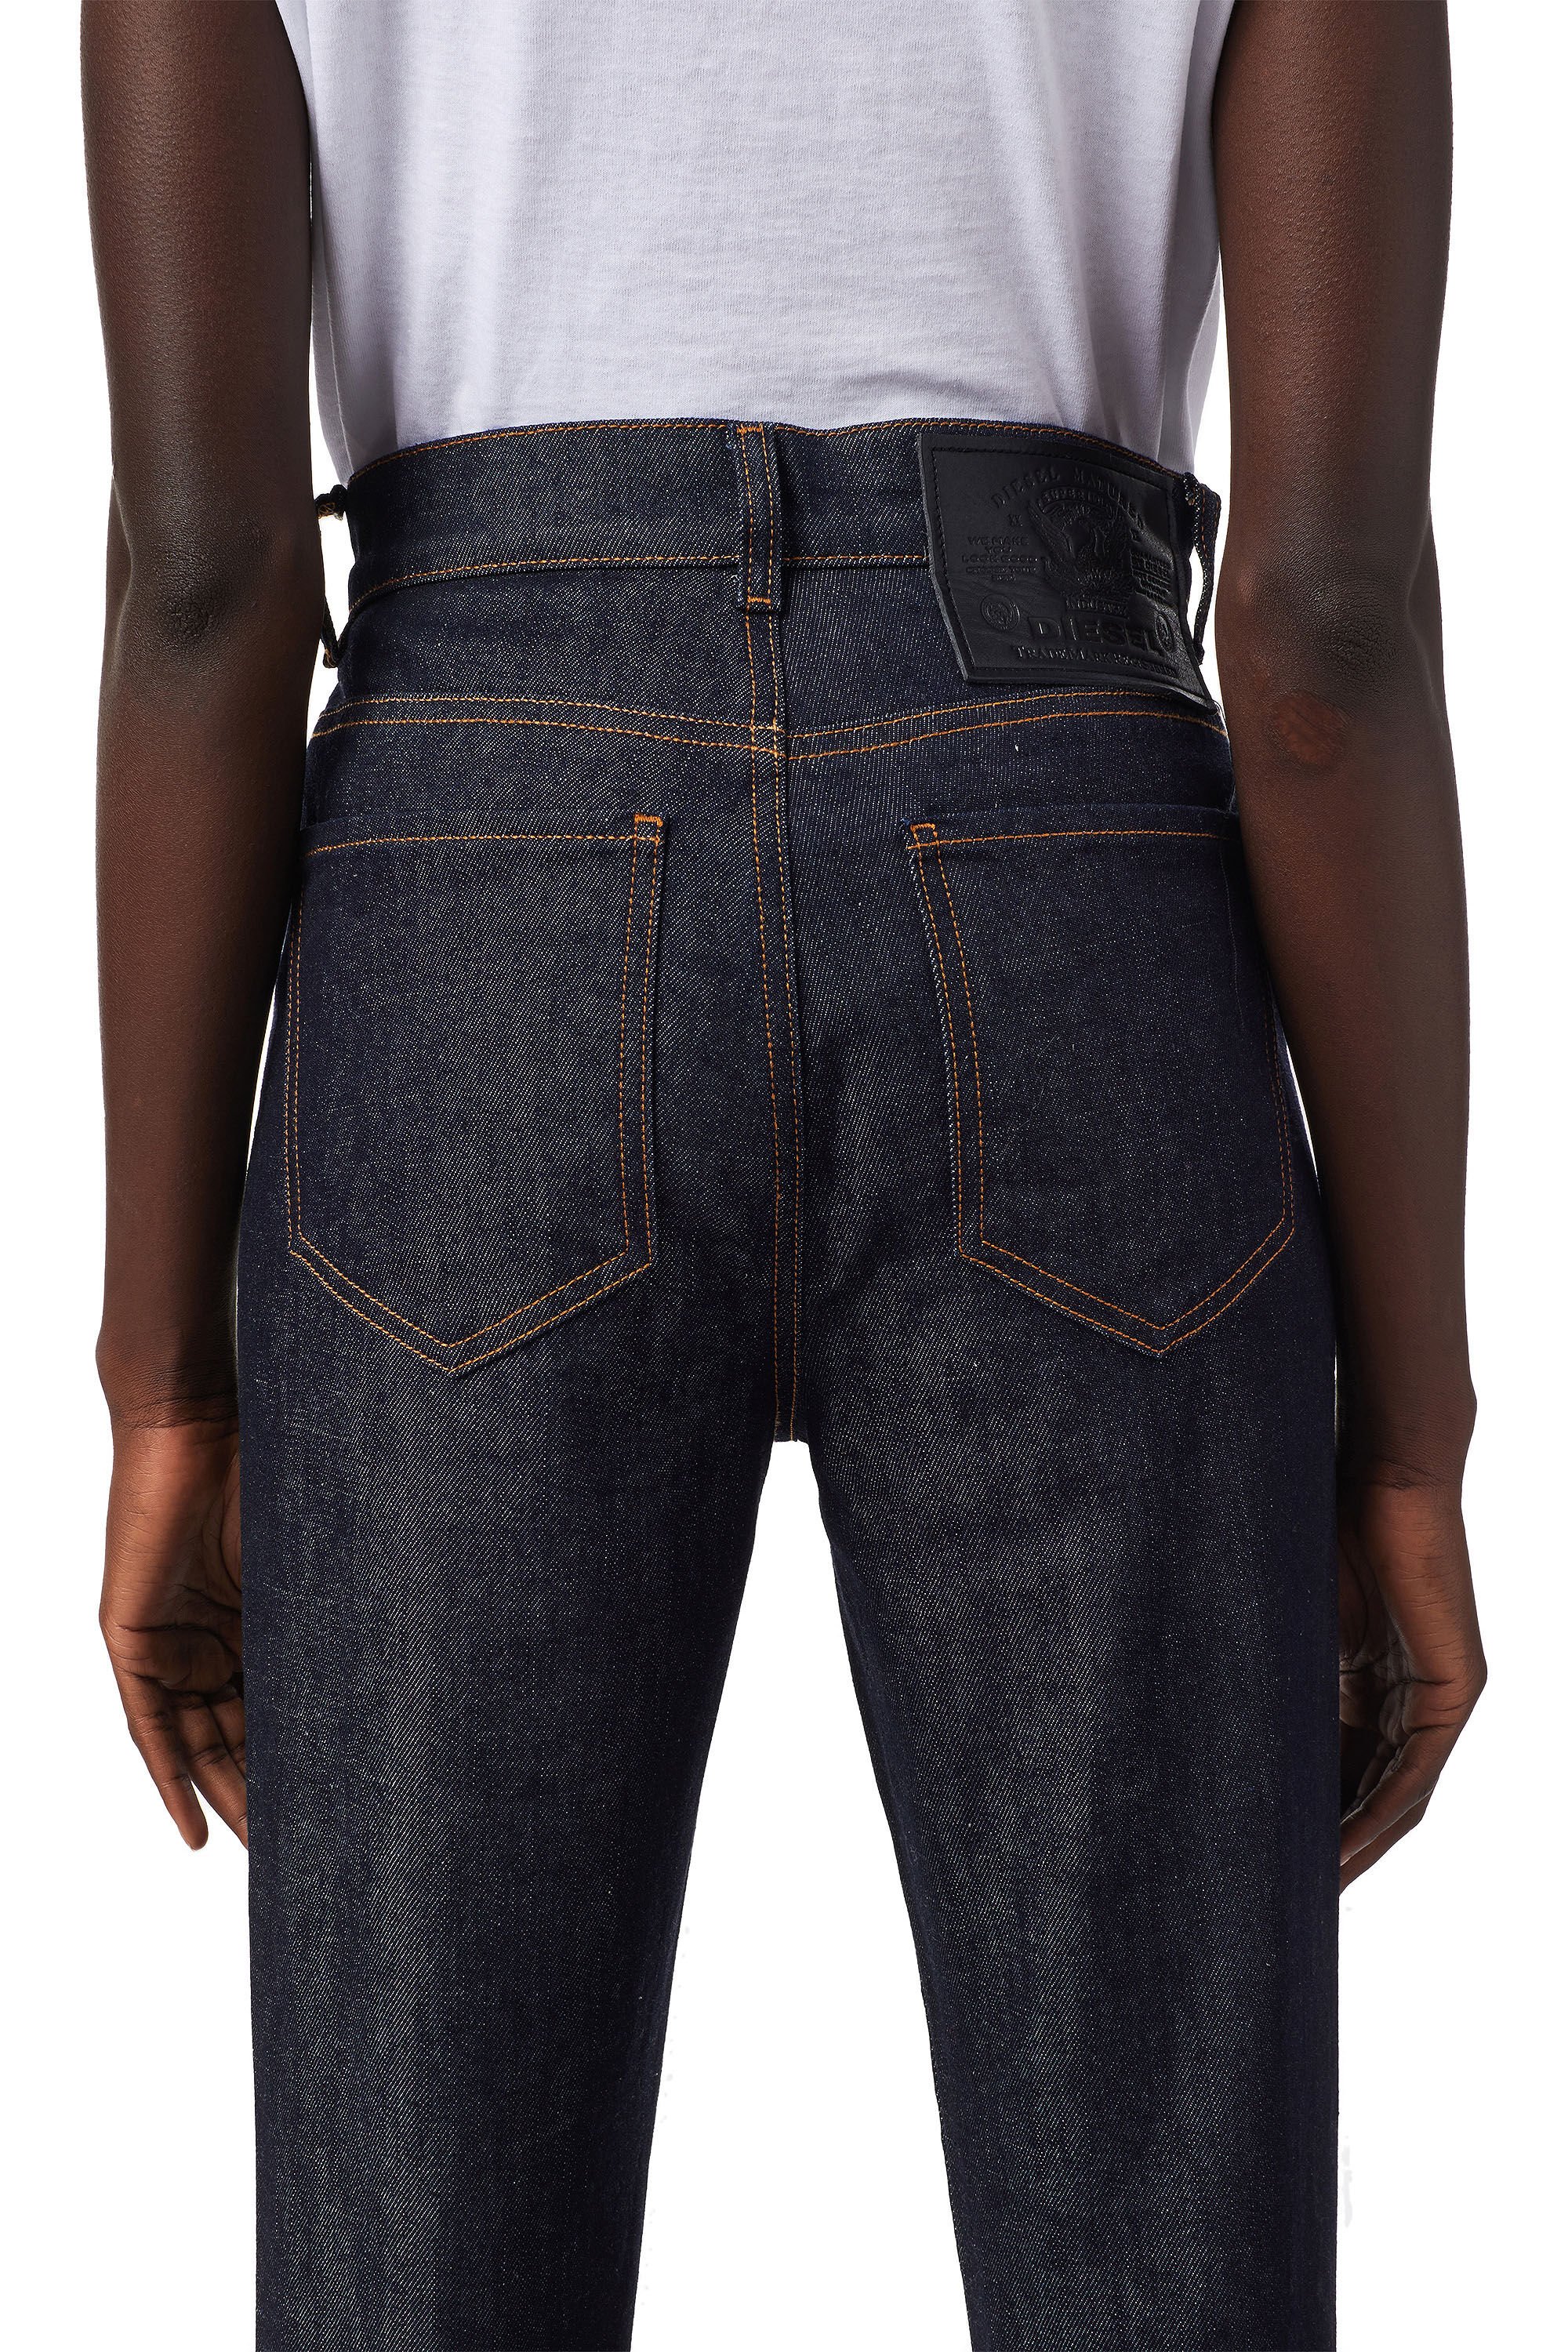 Diesel - D-Arcy 09B39 Straight Jeans,  - Image 6